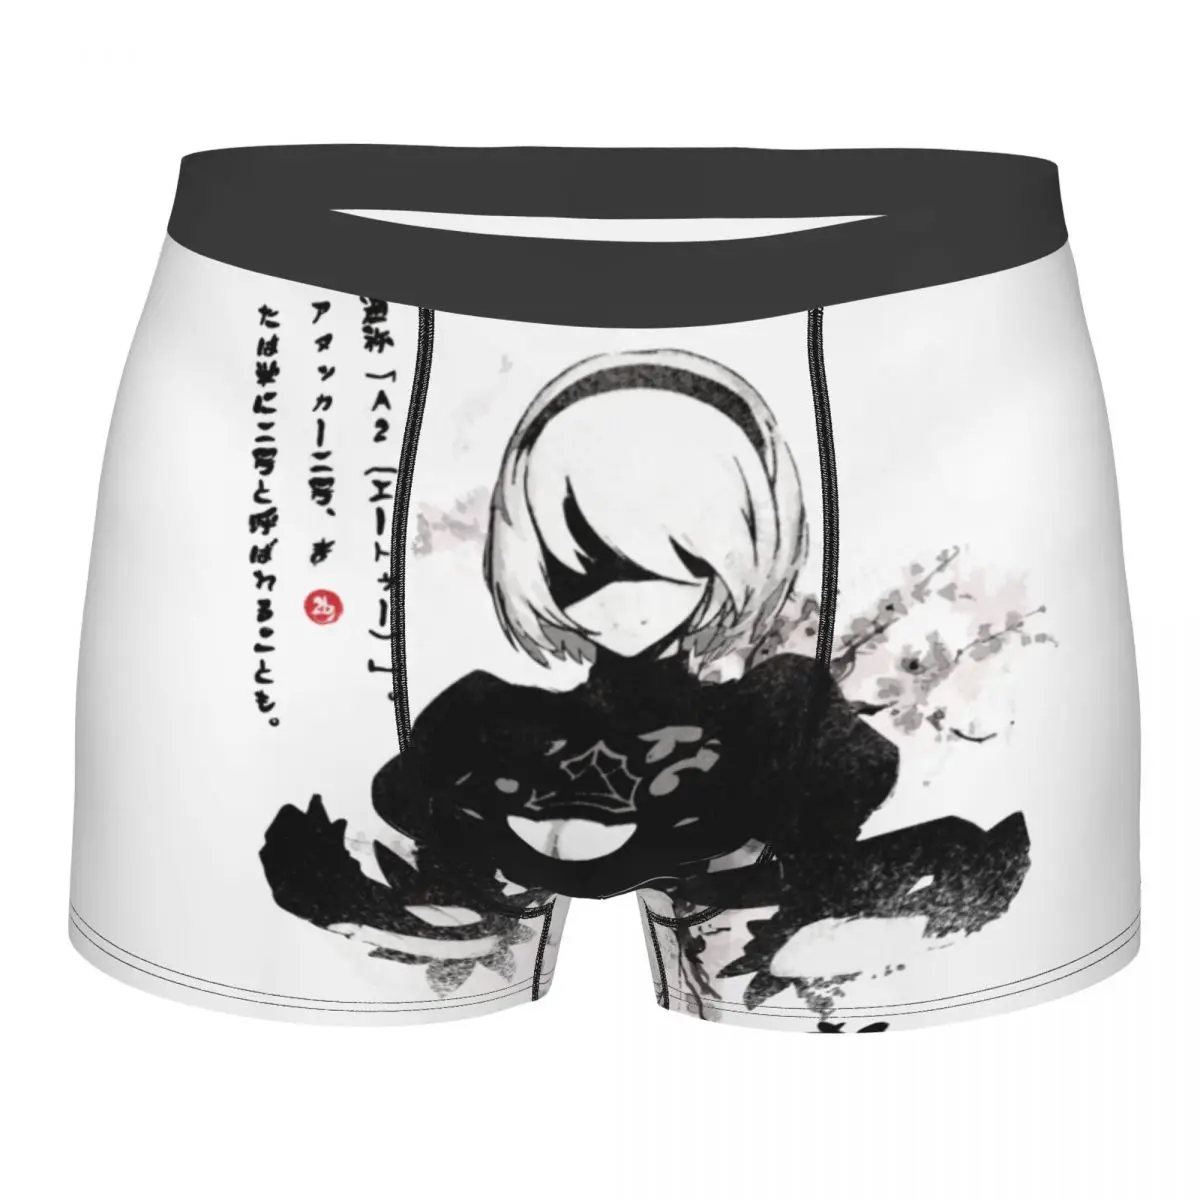 

Funny Boxer Shorts Panties Men's NieR Automata 2B Game Waifu Japan Ink Underwear Soft Underpants for Male